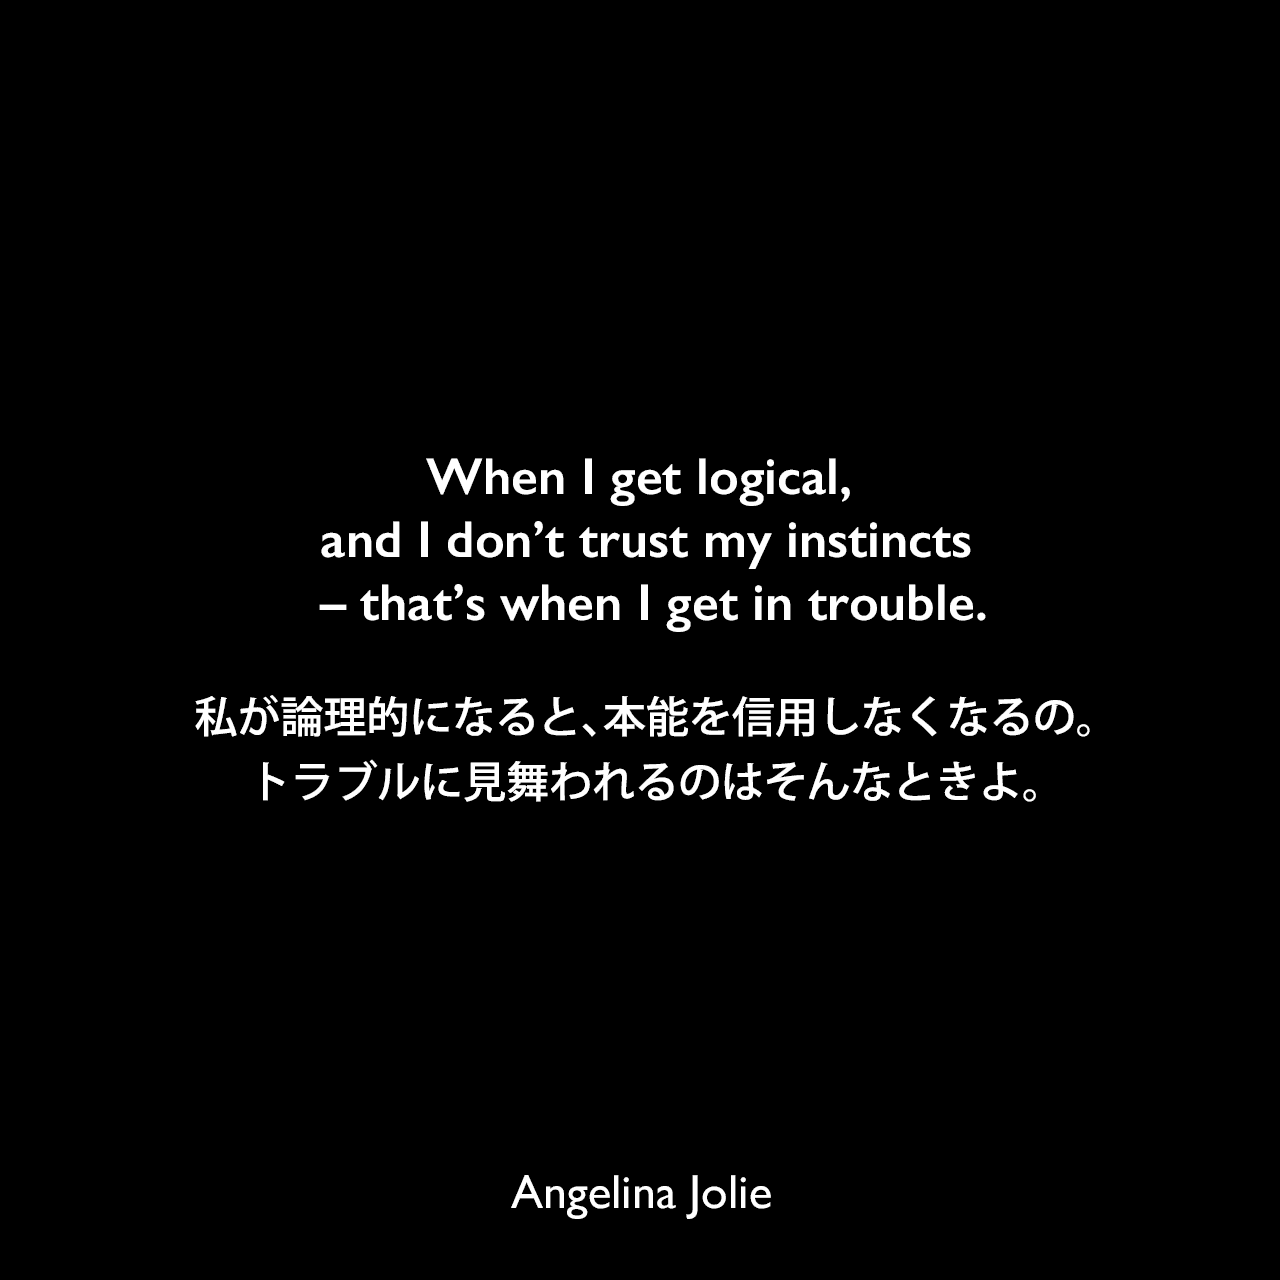 When I get logical, and I don’t trust my instincts – that’s when I get in trouble.私が論理的になると、本能を信用しなくなるの。トラブルに見舞われるのはそんなときよ。Angelina Jolie